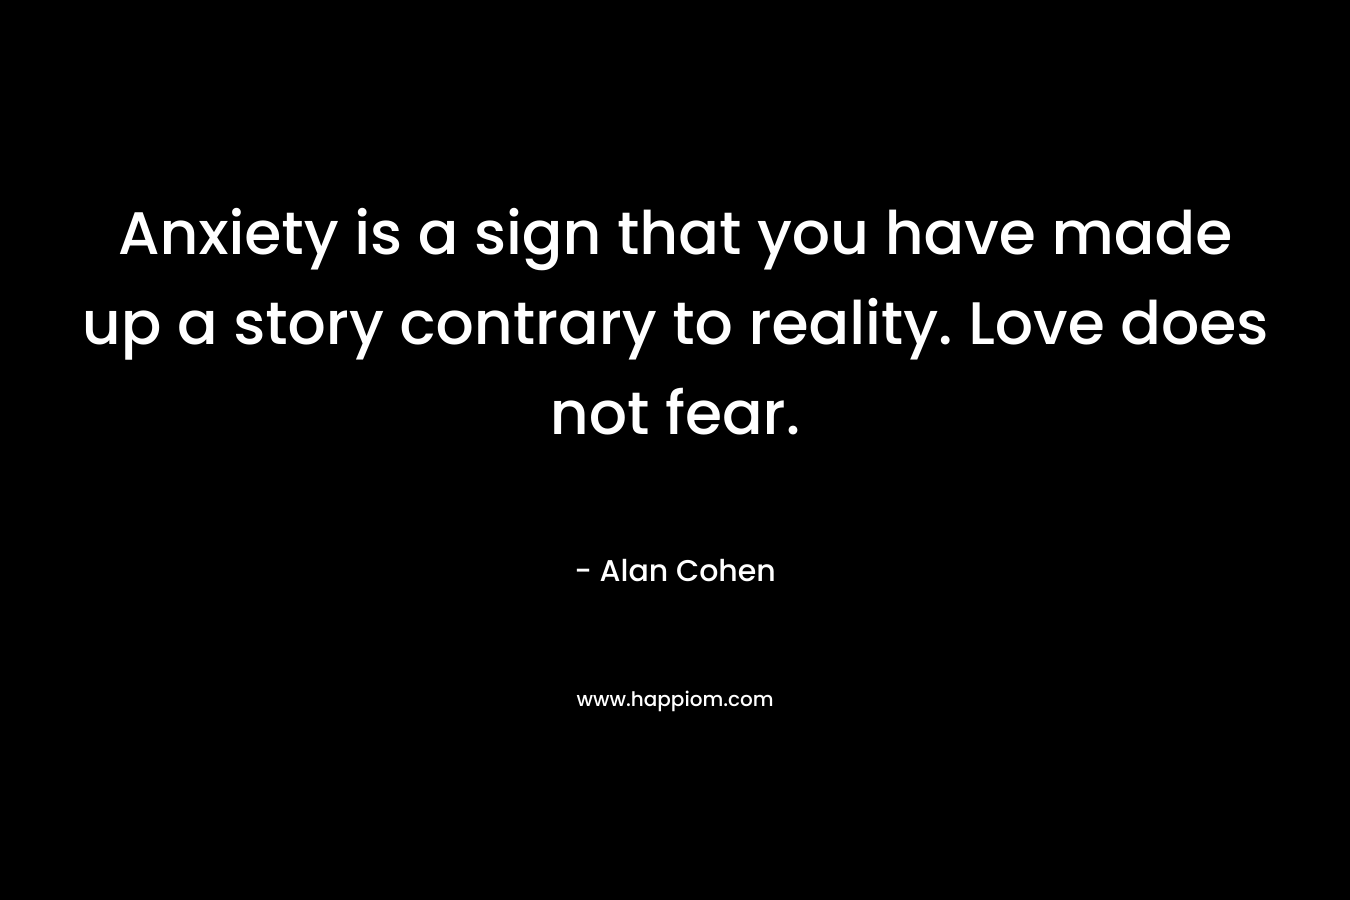 Anxiety is a sign that you have made up a story contrary to reality. Love does not fear. – Alan Cohen